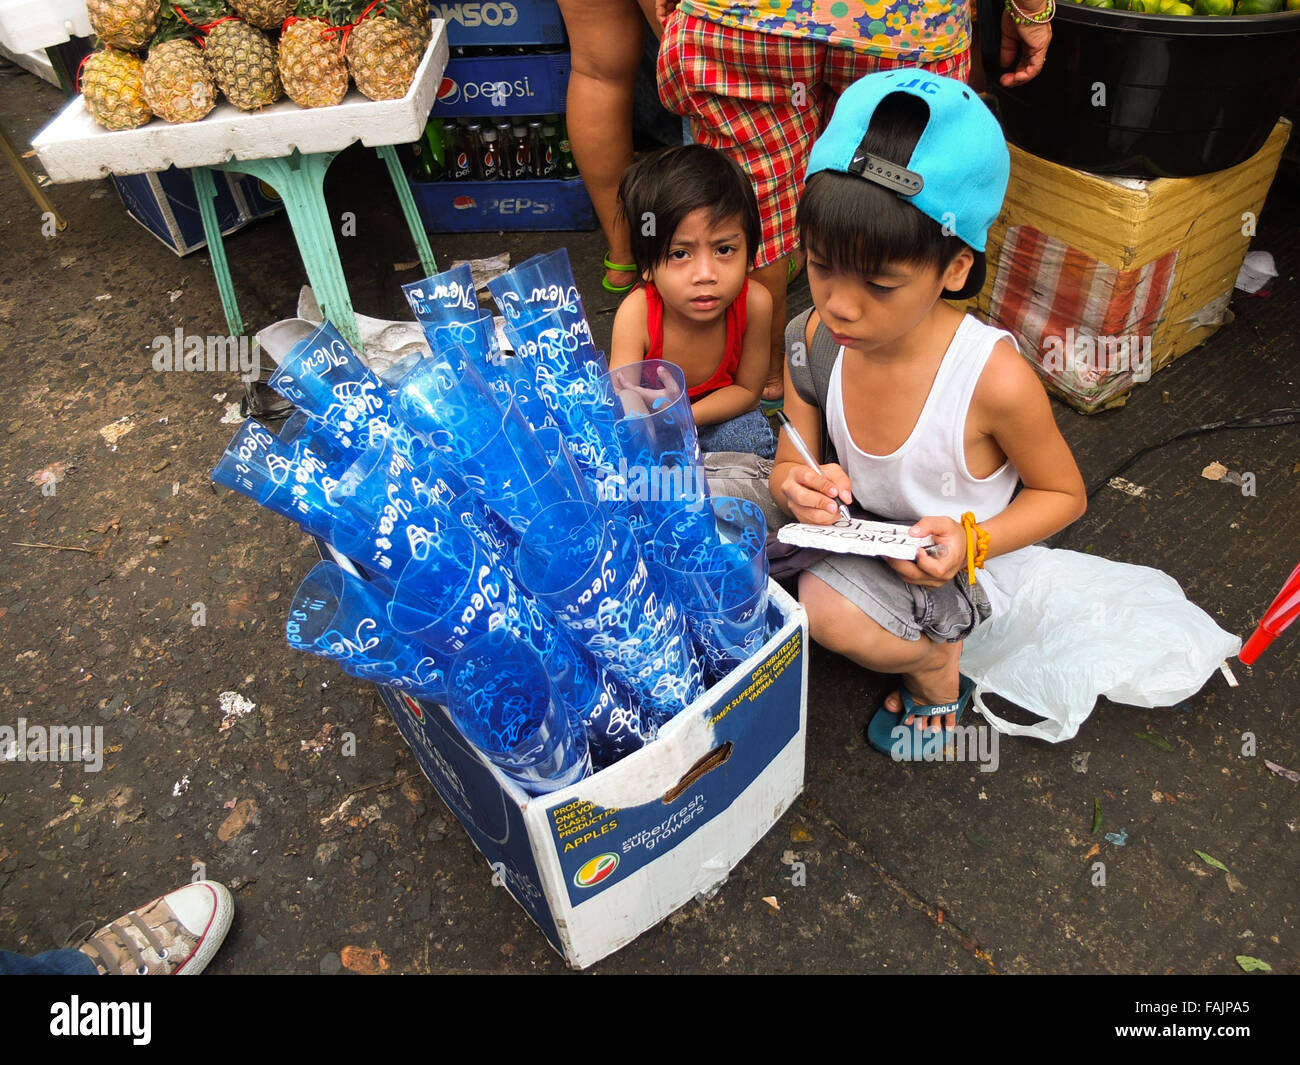 This child calculating his earnings by selling hornpipes products at Divisoria in Manila. Filipinos anticipation of the last celebration on the calendar, The New Year's Eve with much merry making and superstitious belief on rounded fruits, It believes that it could bring luck. (Photo by Josefiel Rivera / Pacific Press) Stock Photo